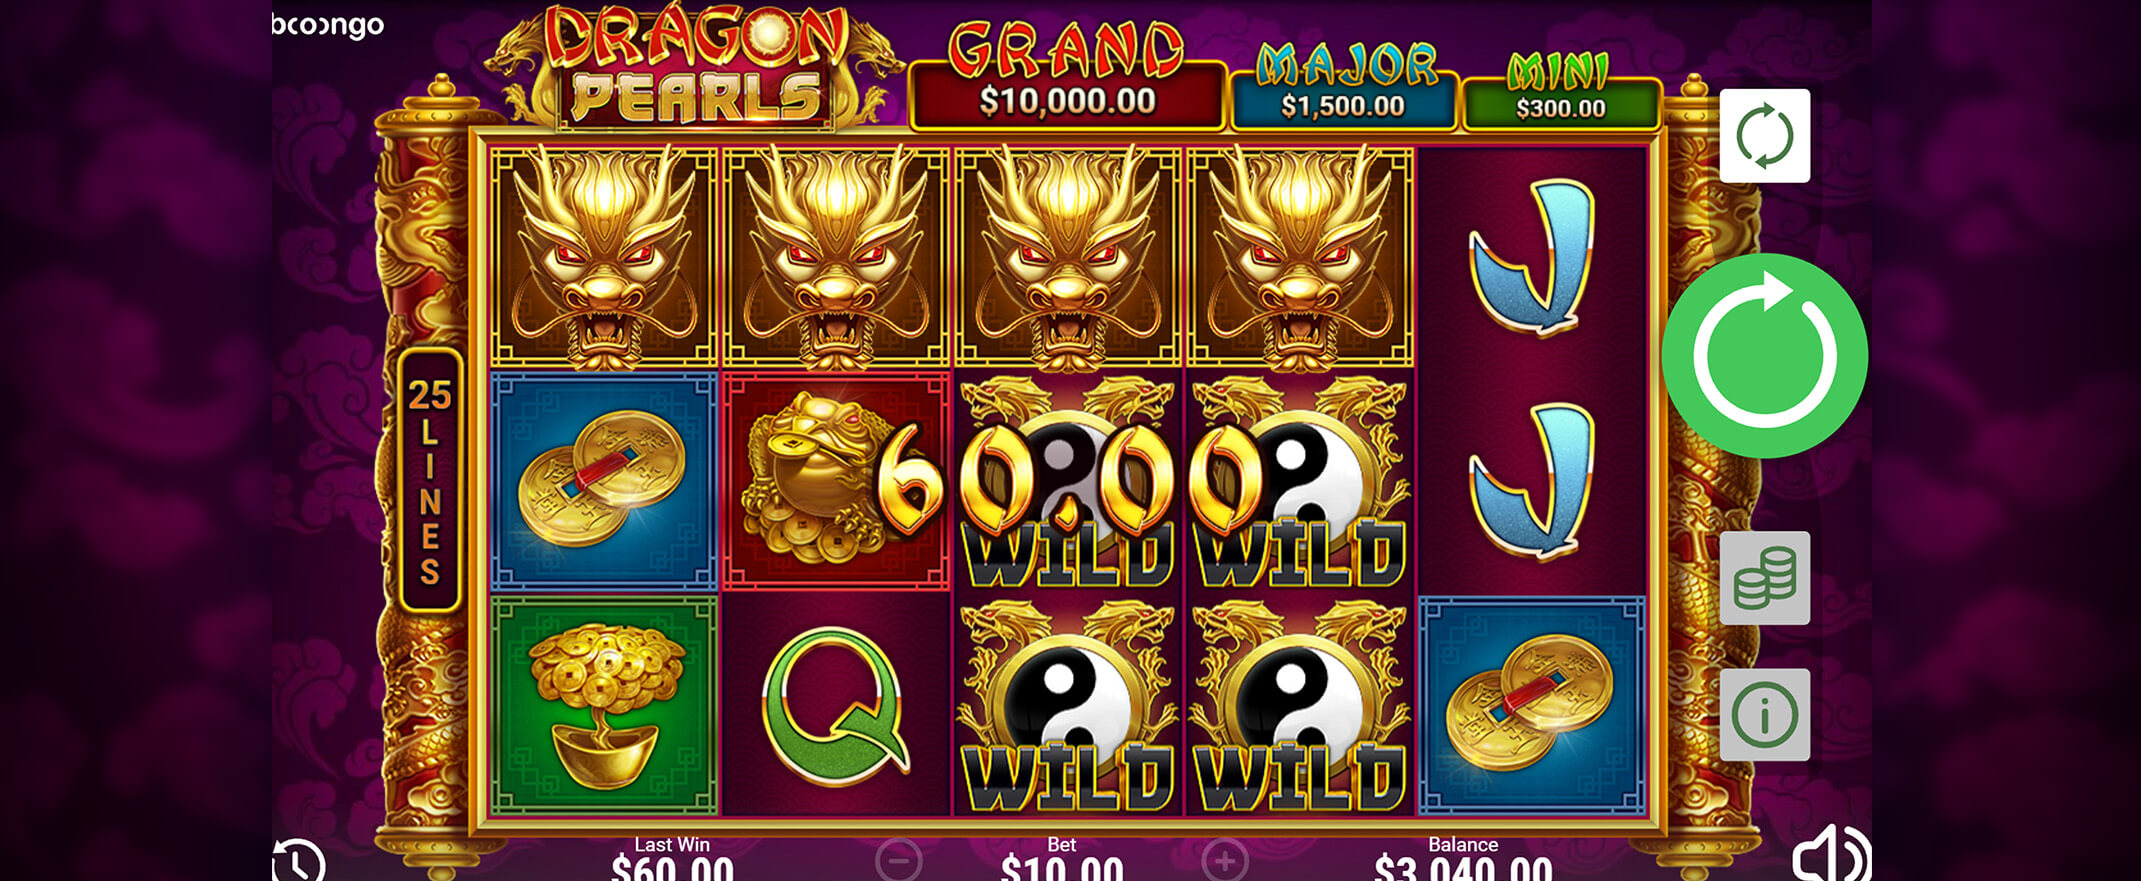 Dragon Pearls: Hold and Win spielautomat von Booongo